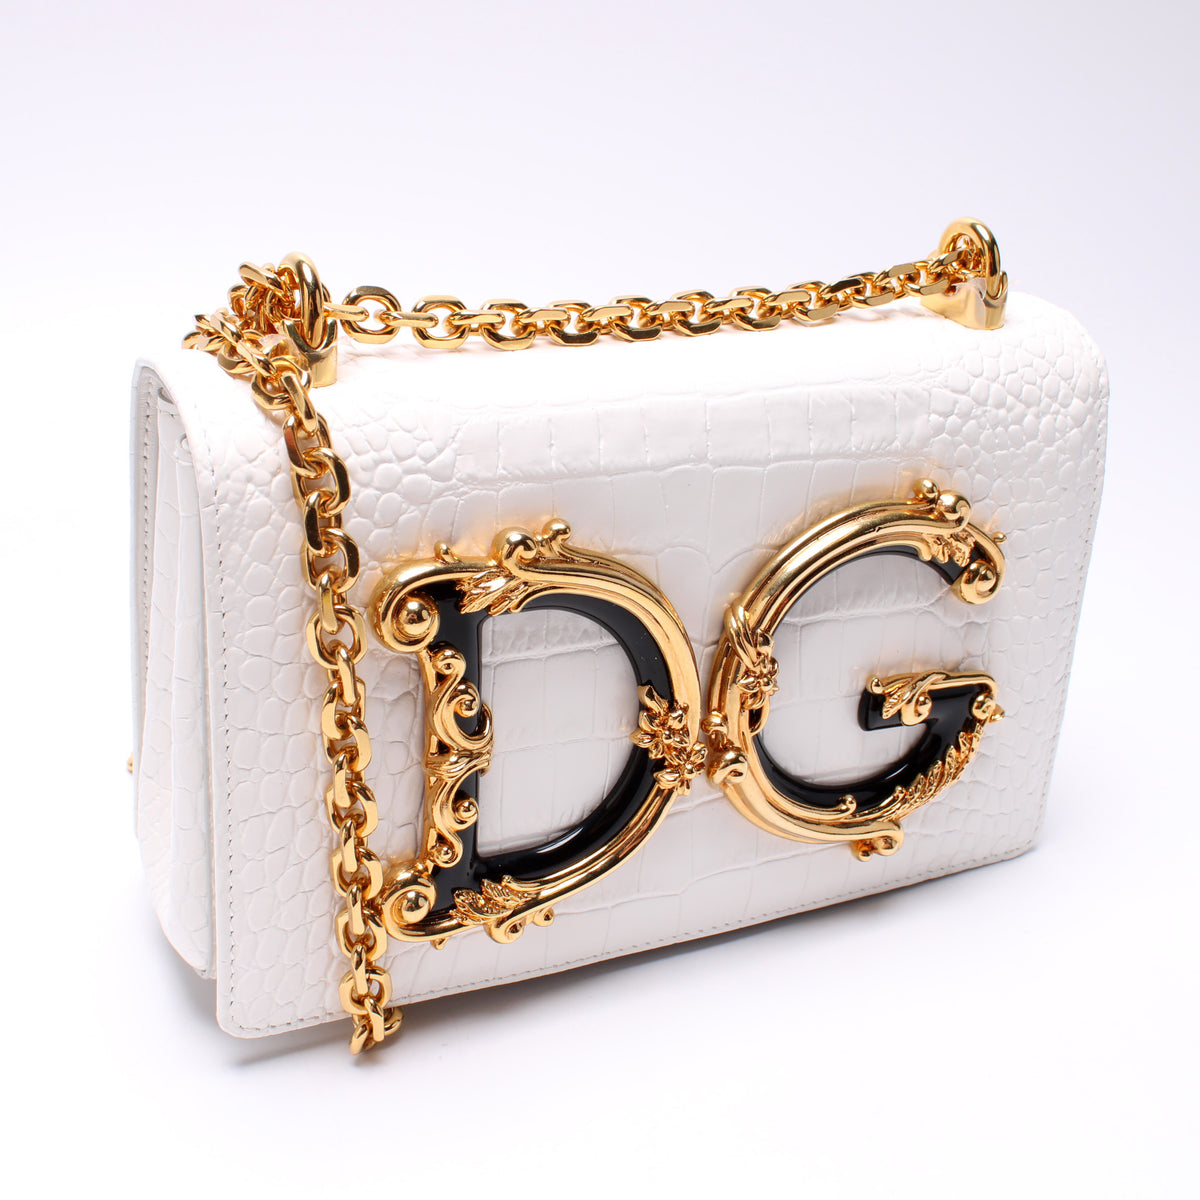 Dolce Gabbana Handbags and Shoes @ 6PM.com Up to 75% Off + Extra